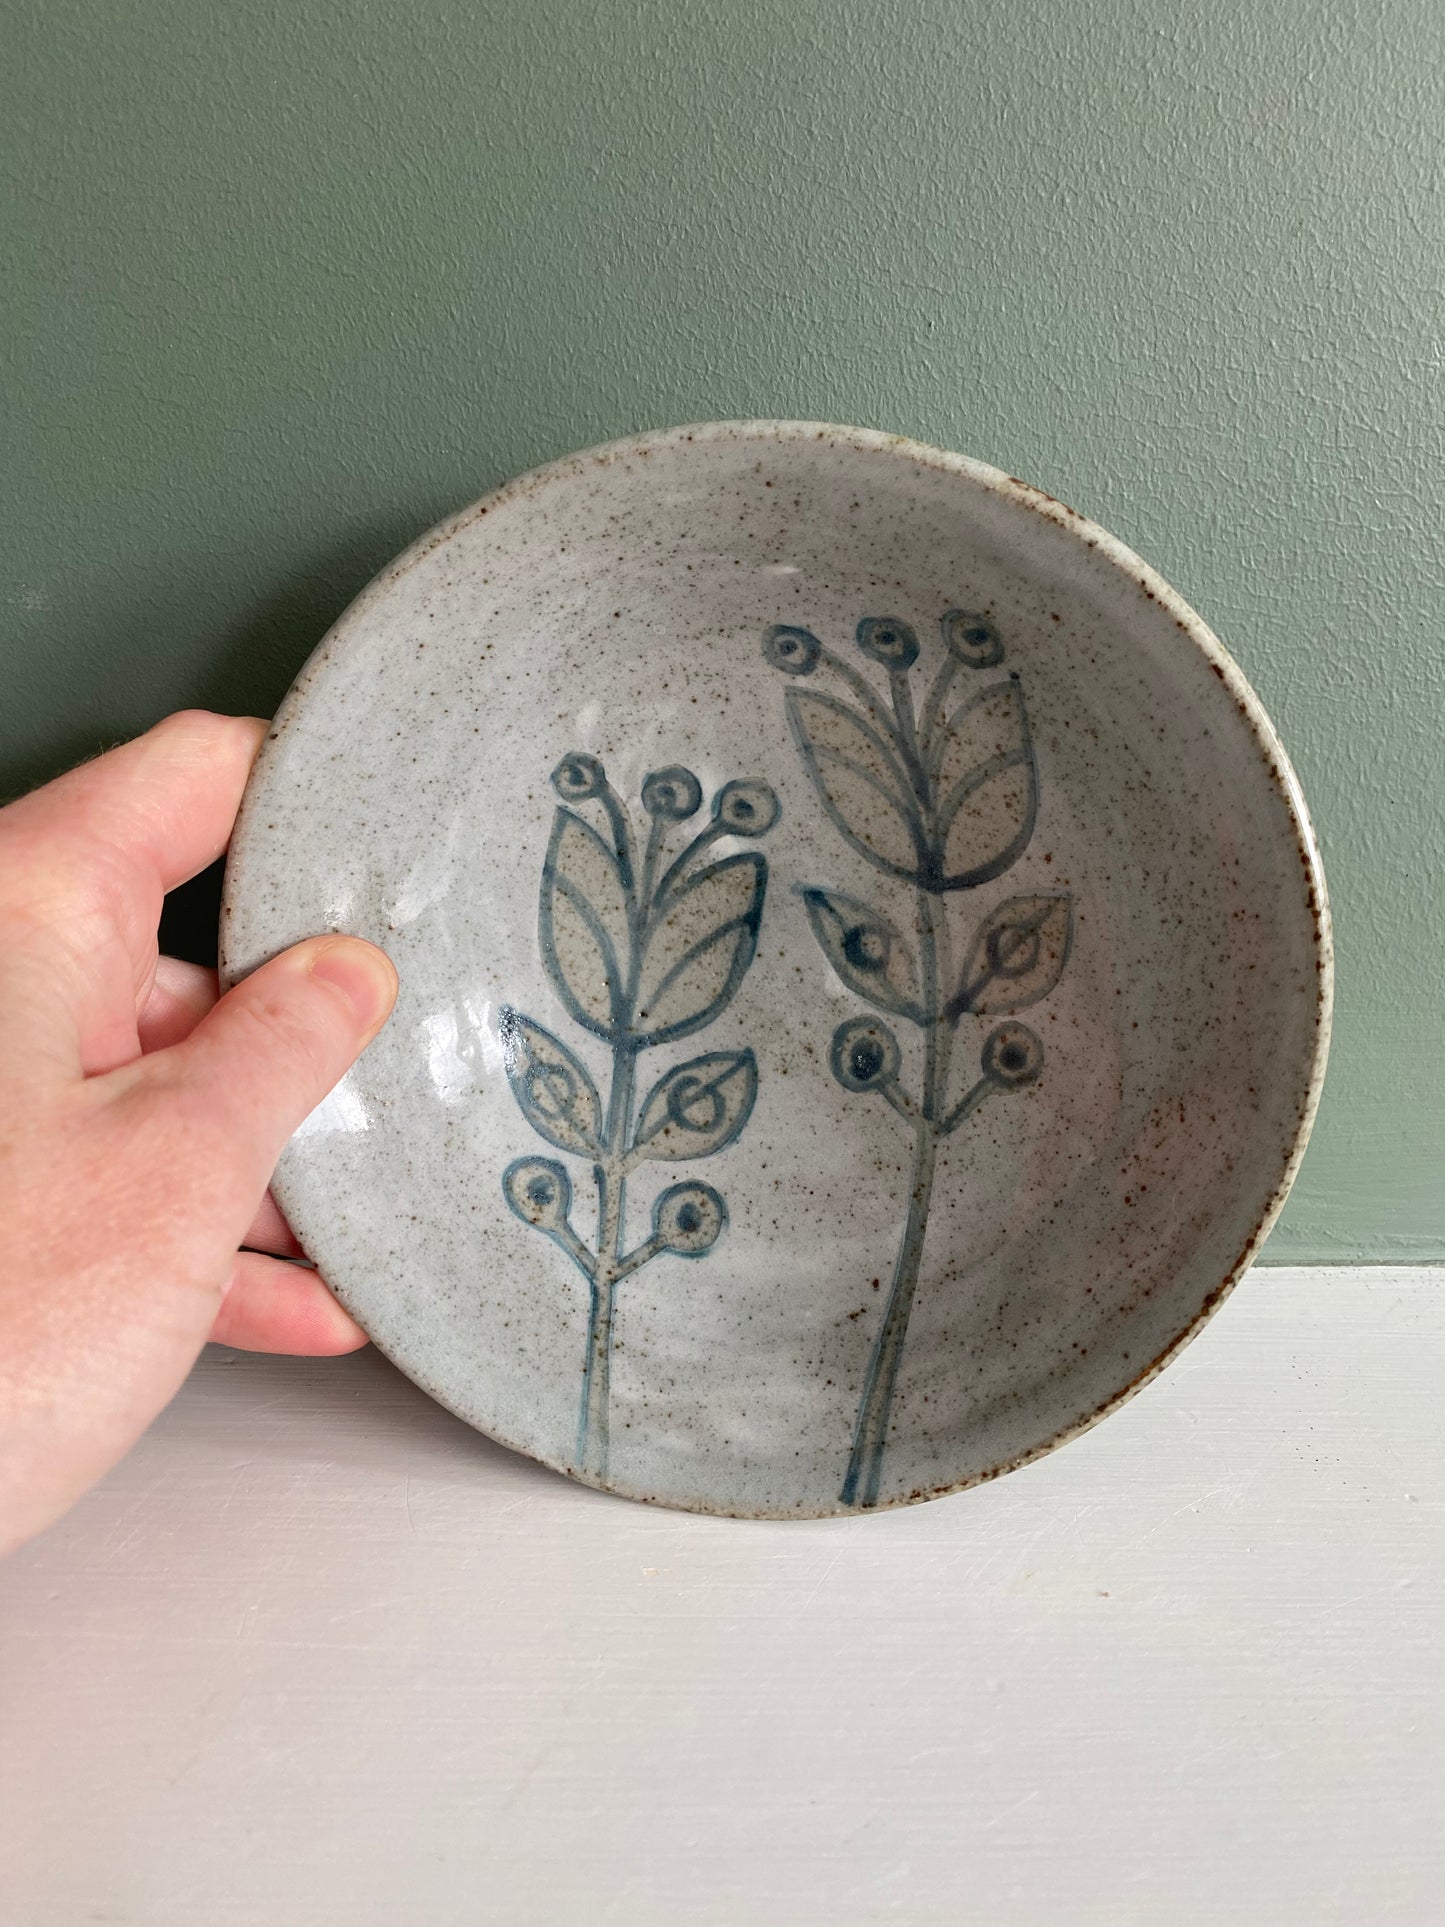 Stoneware small bowl with flower design, reduction gas fired